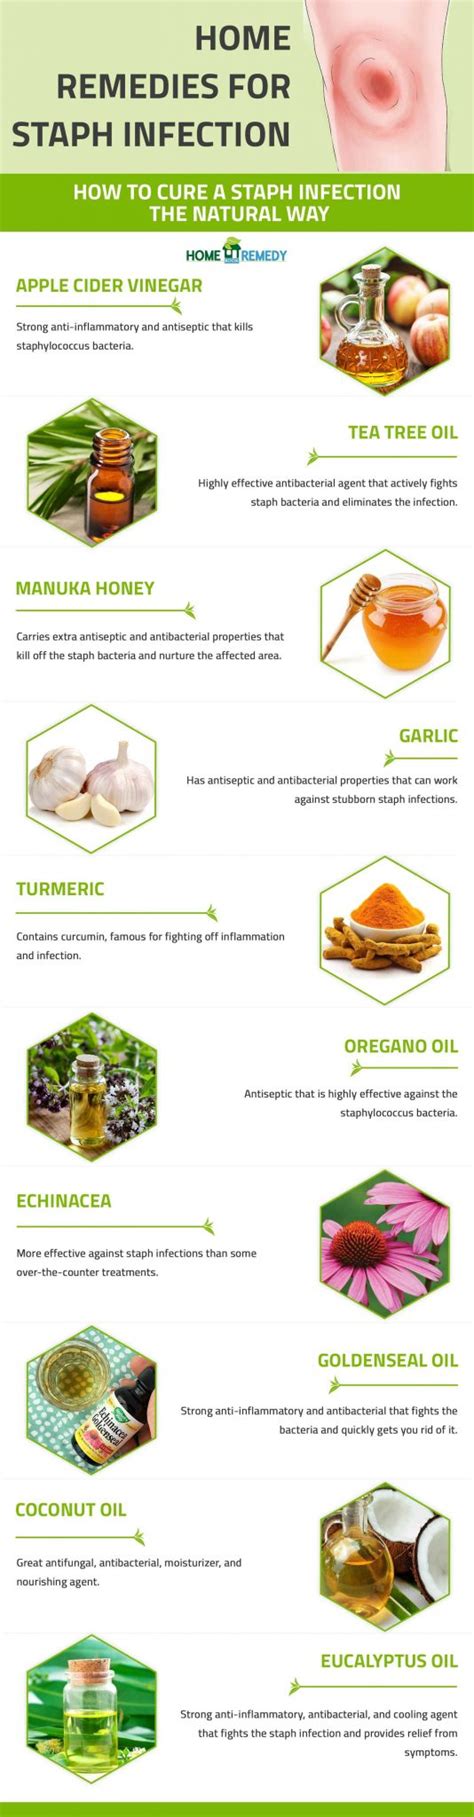 13 Home Remedies For Staph Infection Infographic